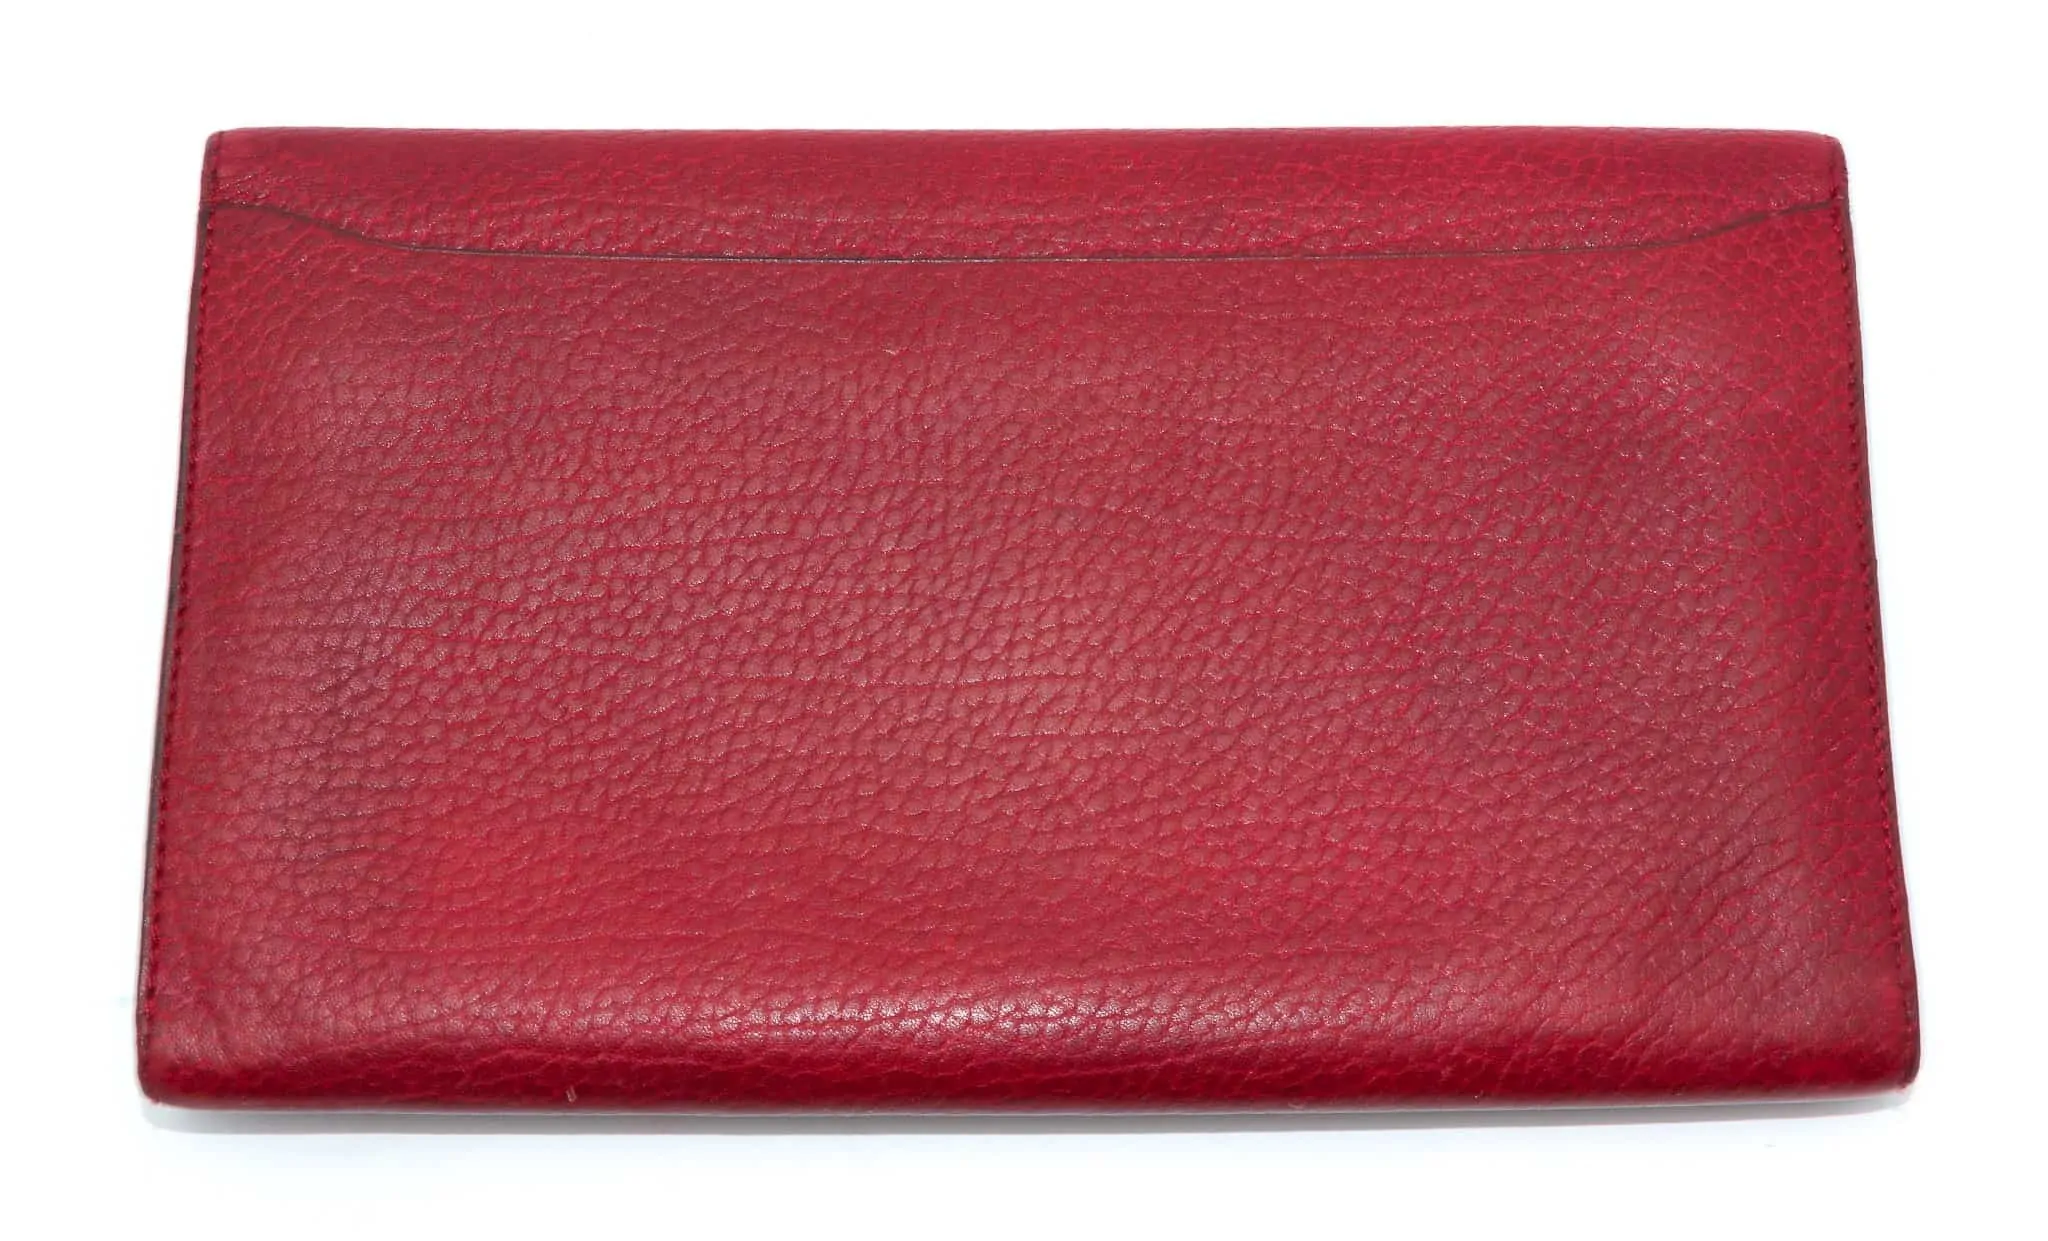 Delvaux Pre-owned Women's Leather Wallet - Red - One Size